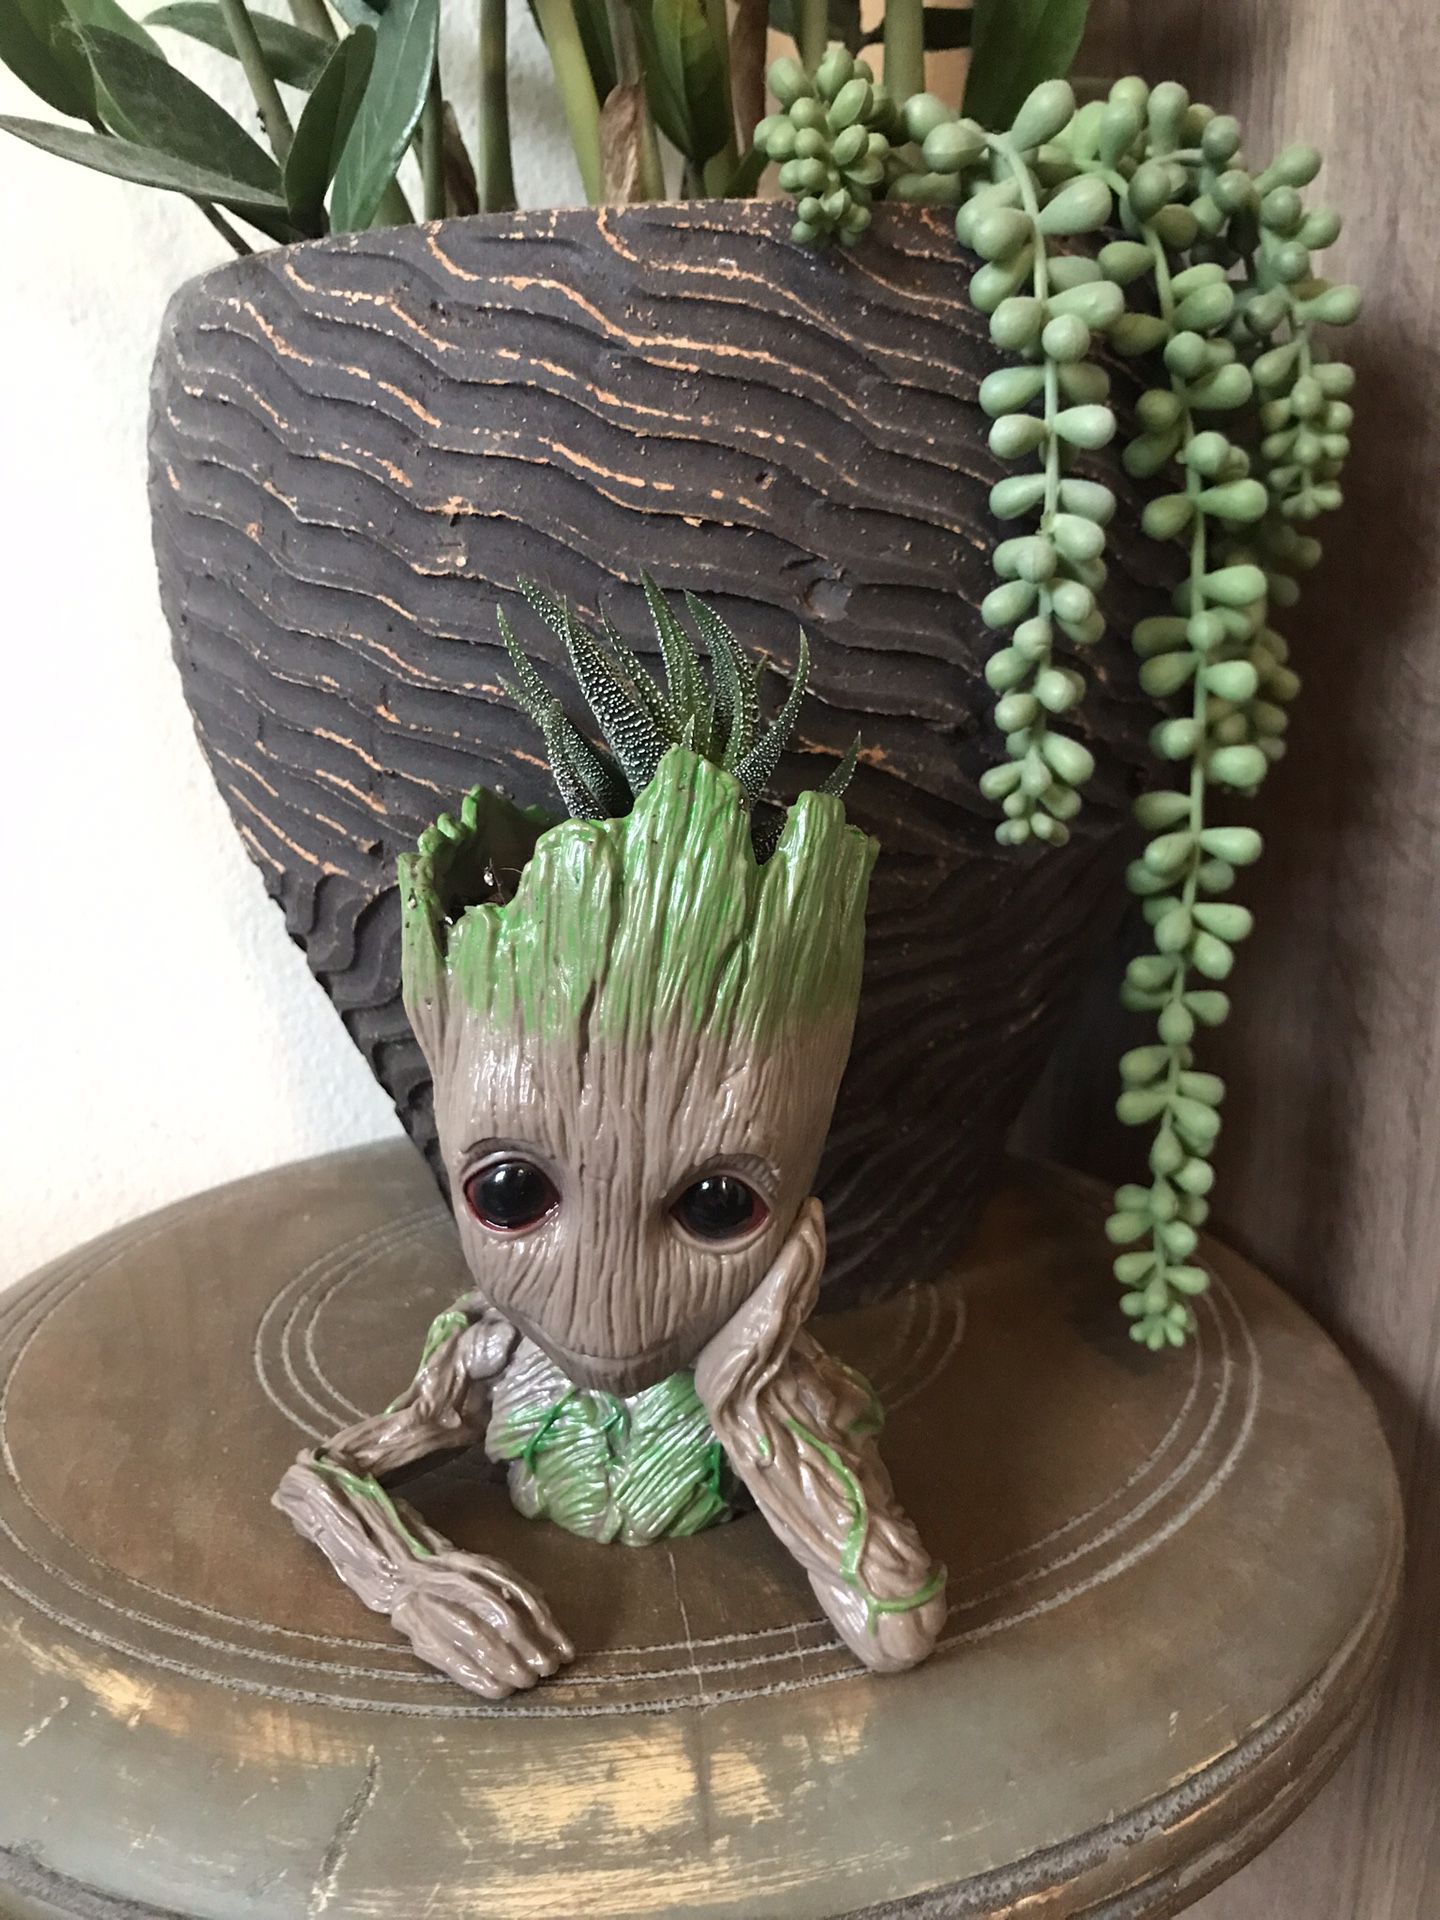 Baby Groot planter with succulent plant or indoor or outdoor use - gifts - patio - porch - potted plants - guardian of galaxy toy